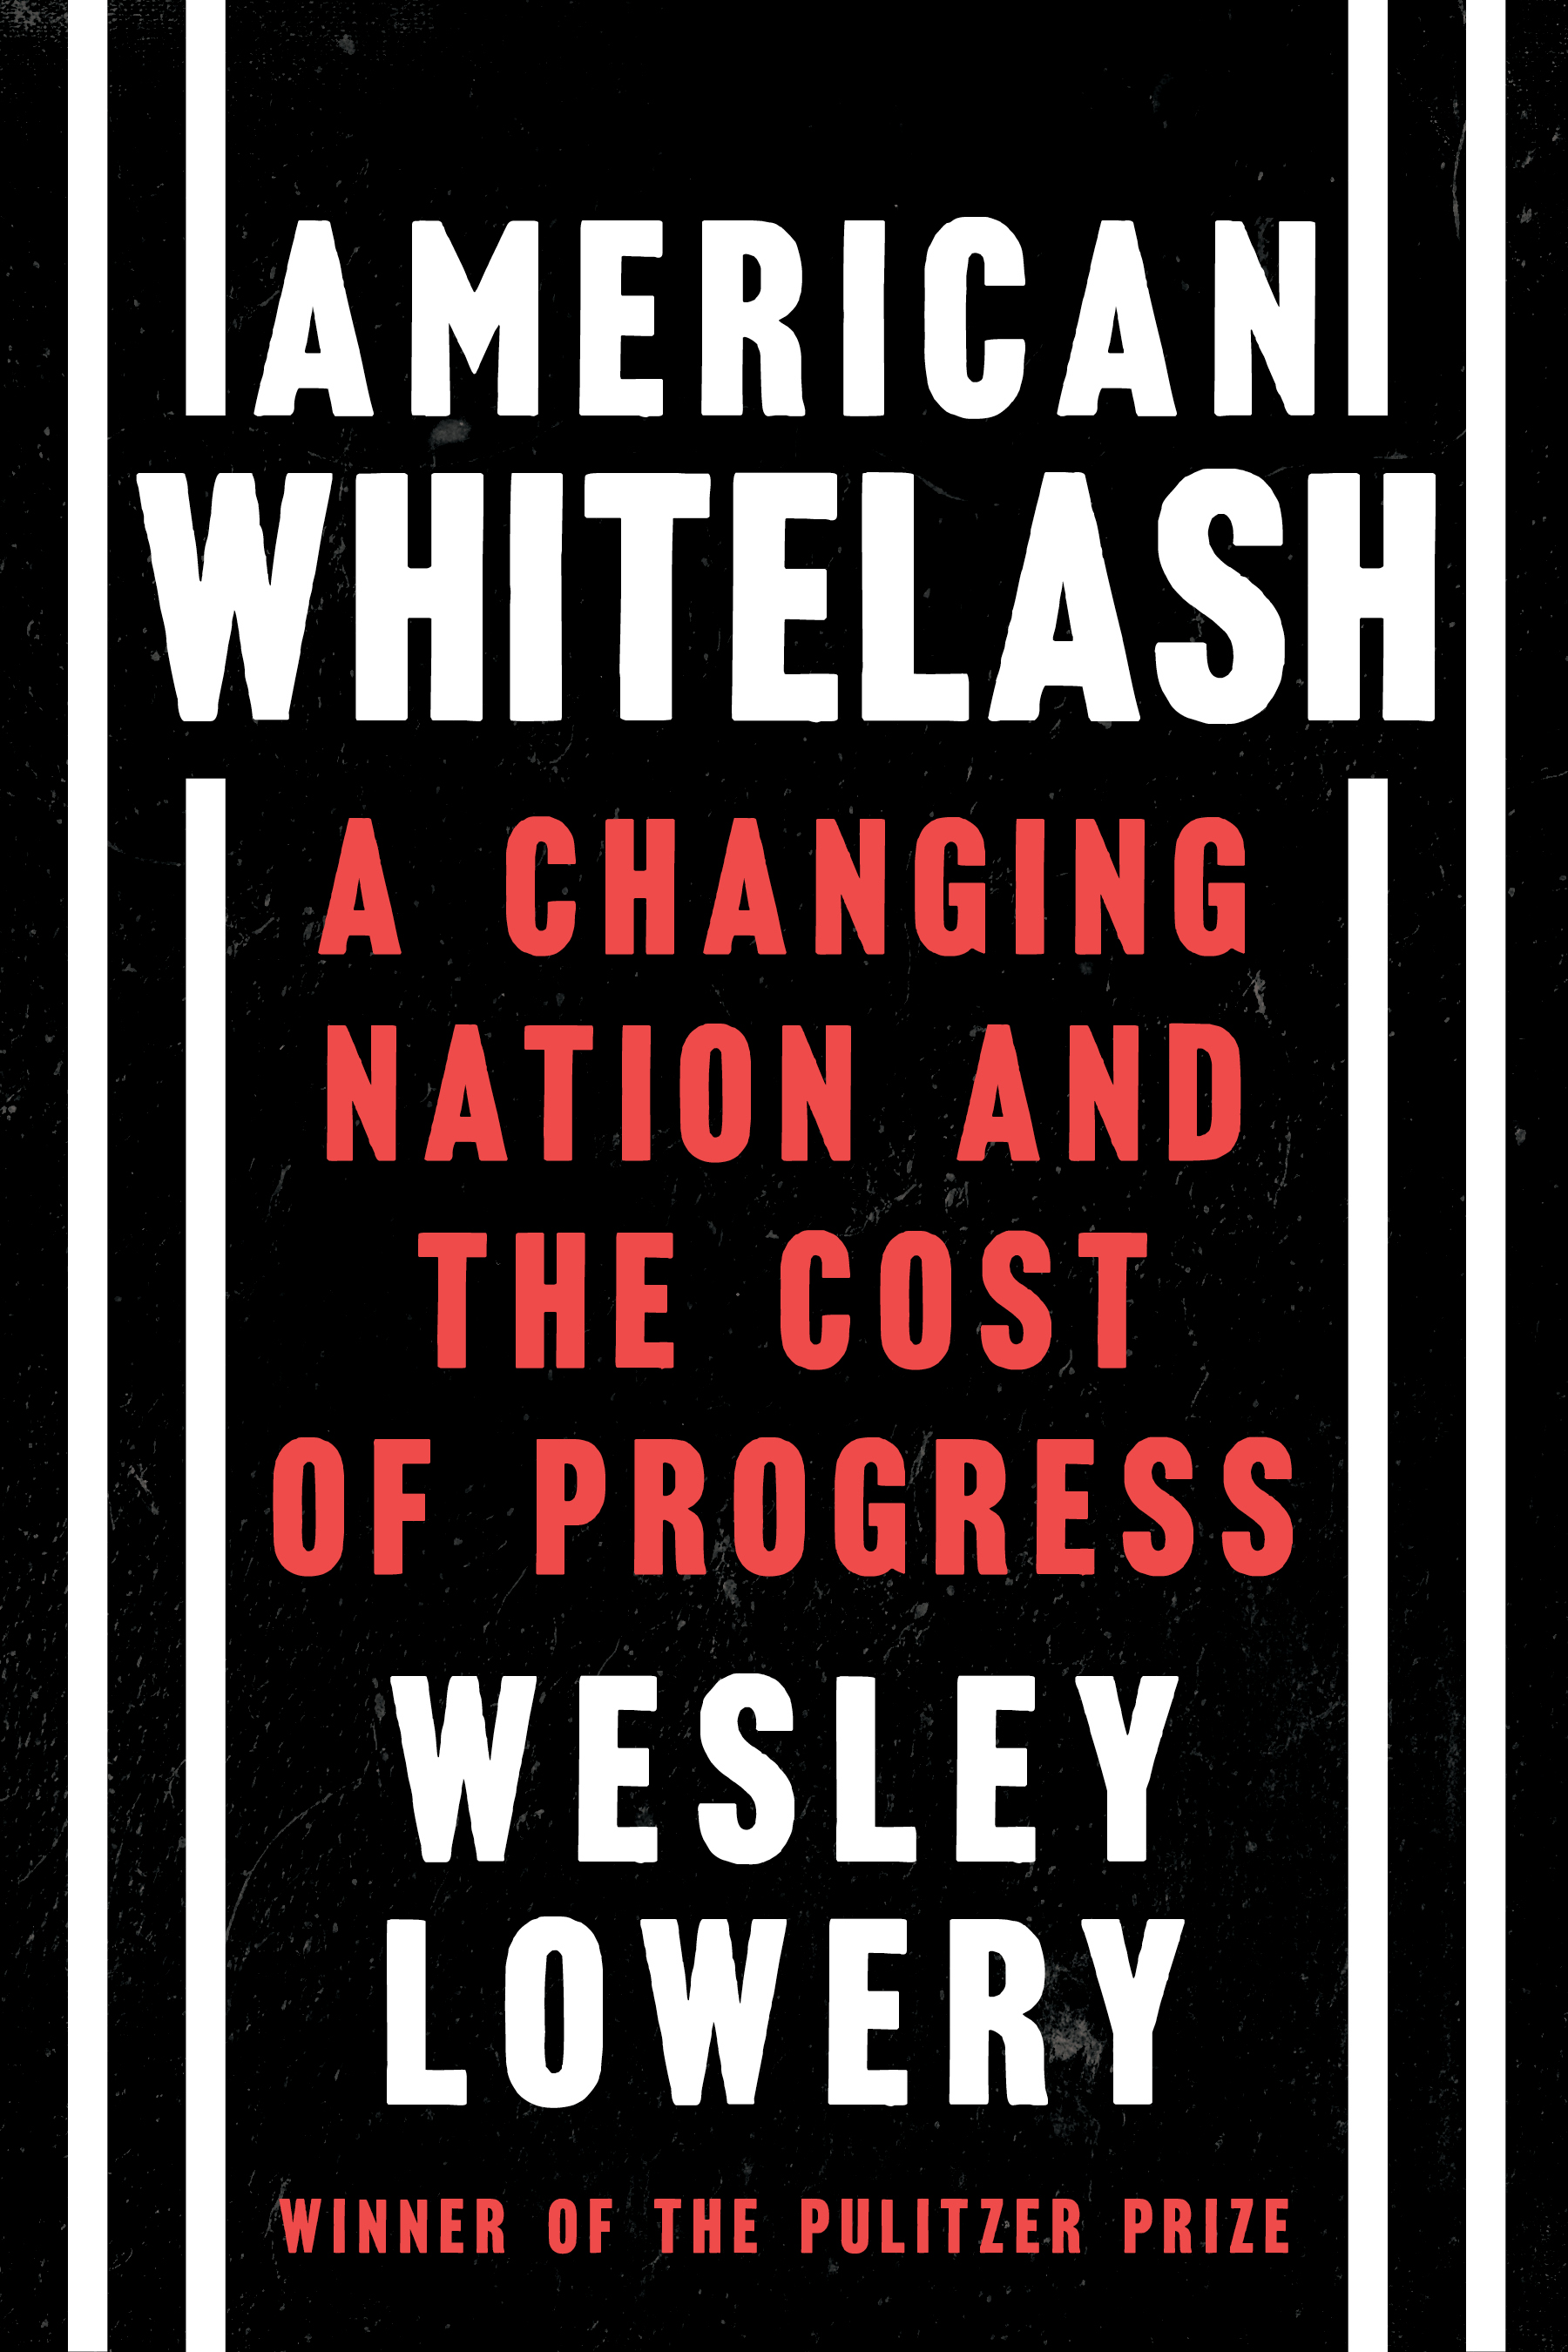 Wesley Lowery explores "American Whitelash" and hate crimes uptick